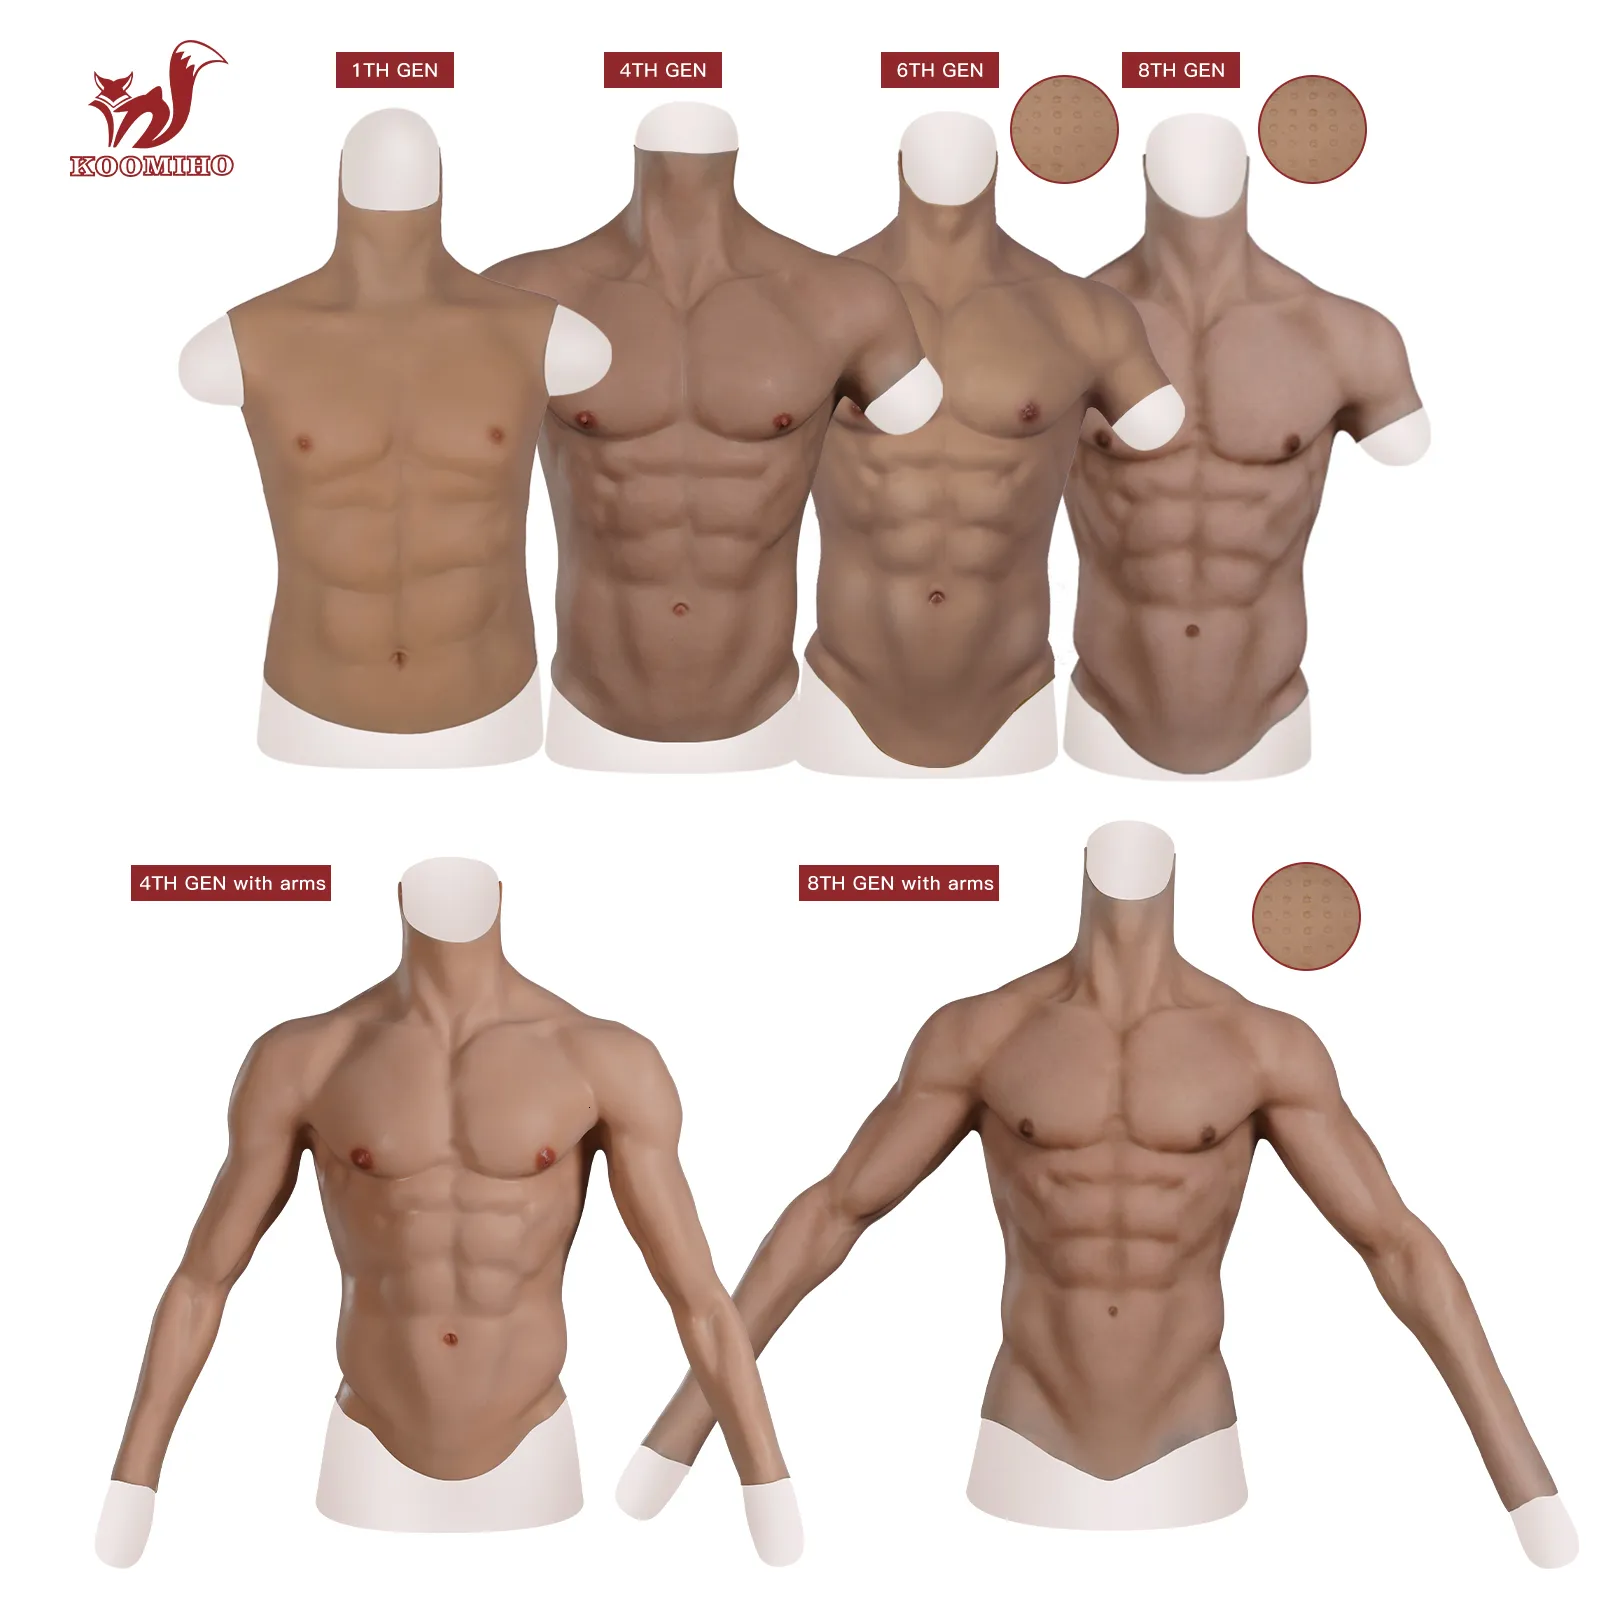 KOOMIHO Silicone Muscle Chest Suit Realistic Male Cosplay Enhancer, Durable  Crossdressing Prosthetic, Skin Tone From Wai04, $208.29